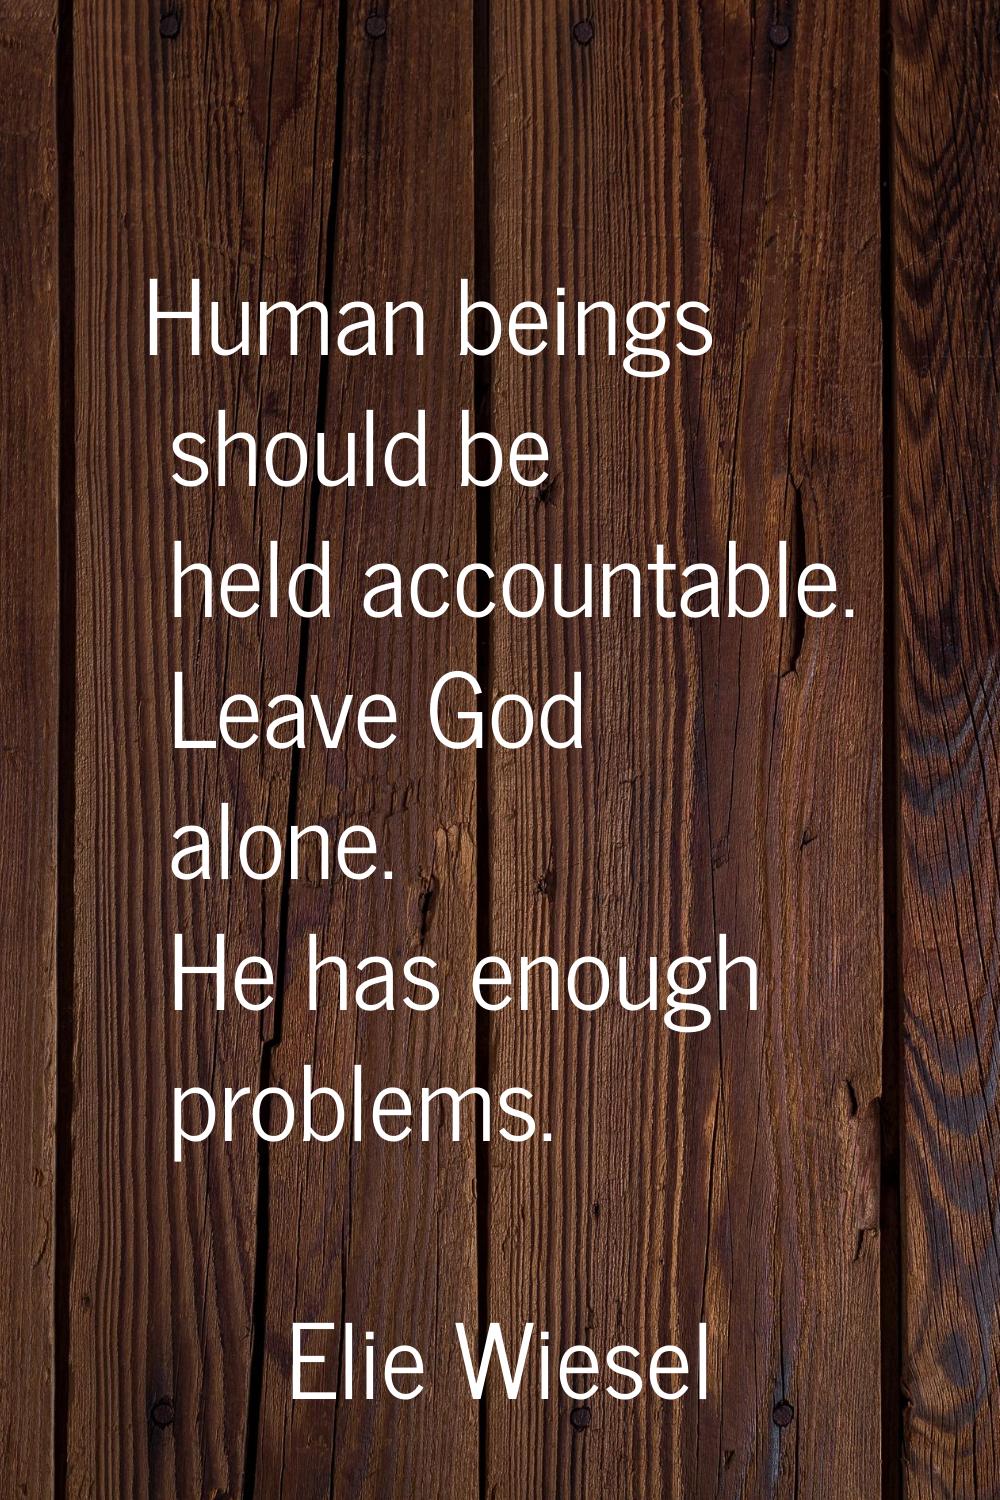 Human beings should be held accountable. Leave God alone. He has enough problems.